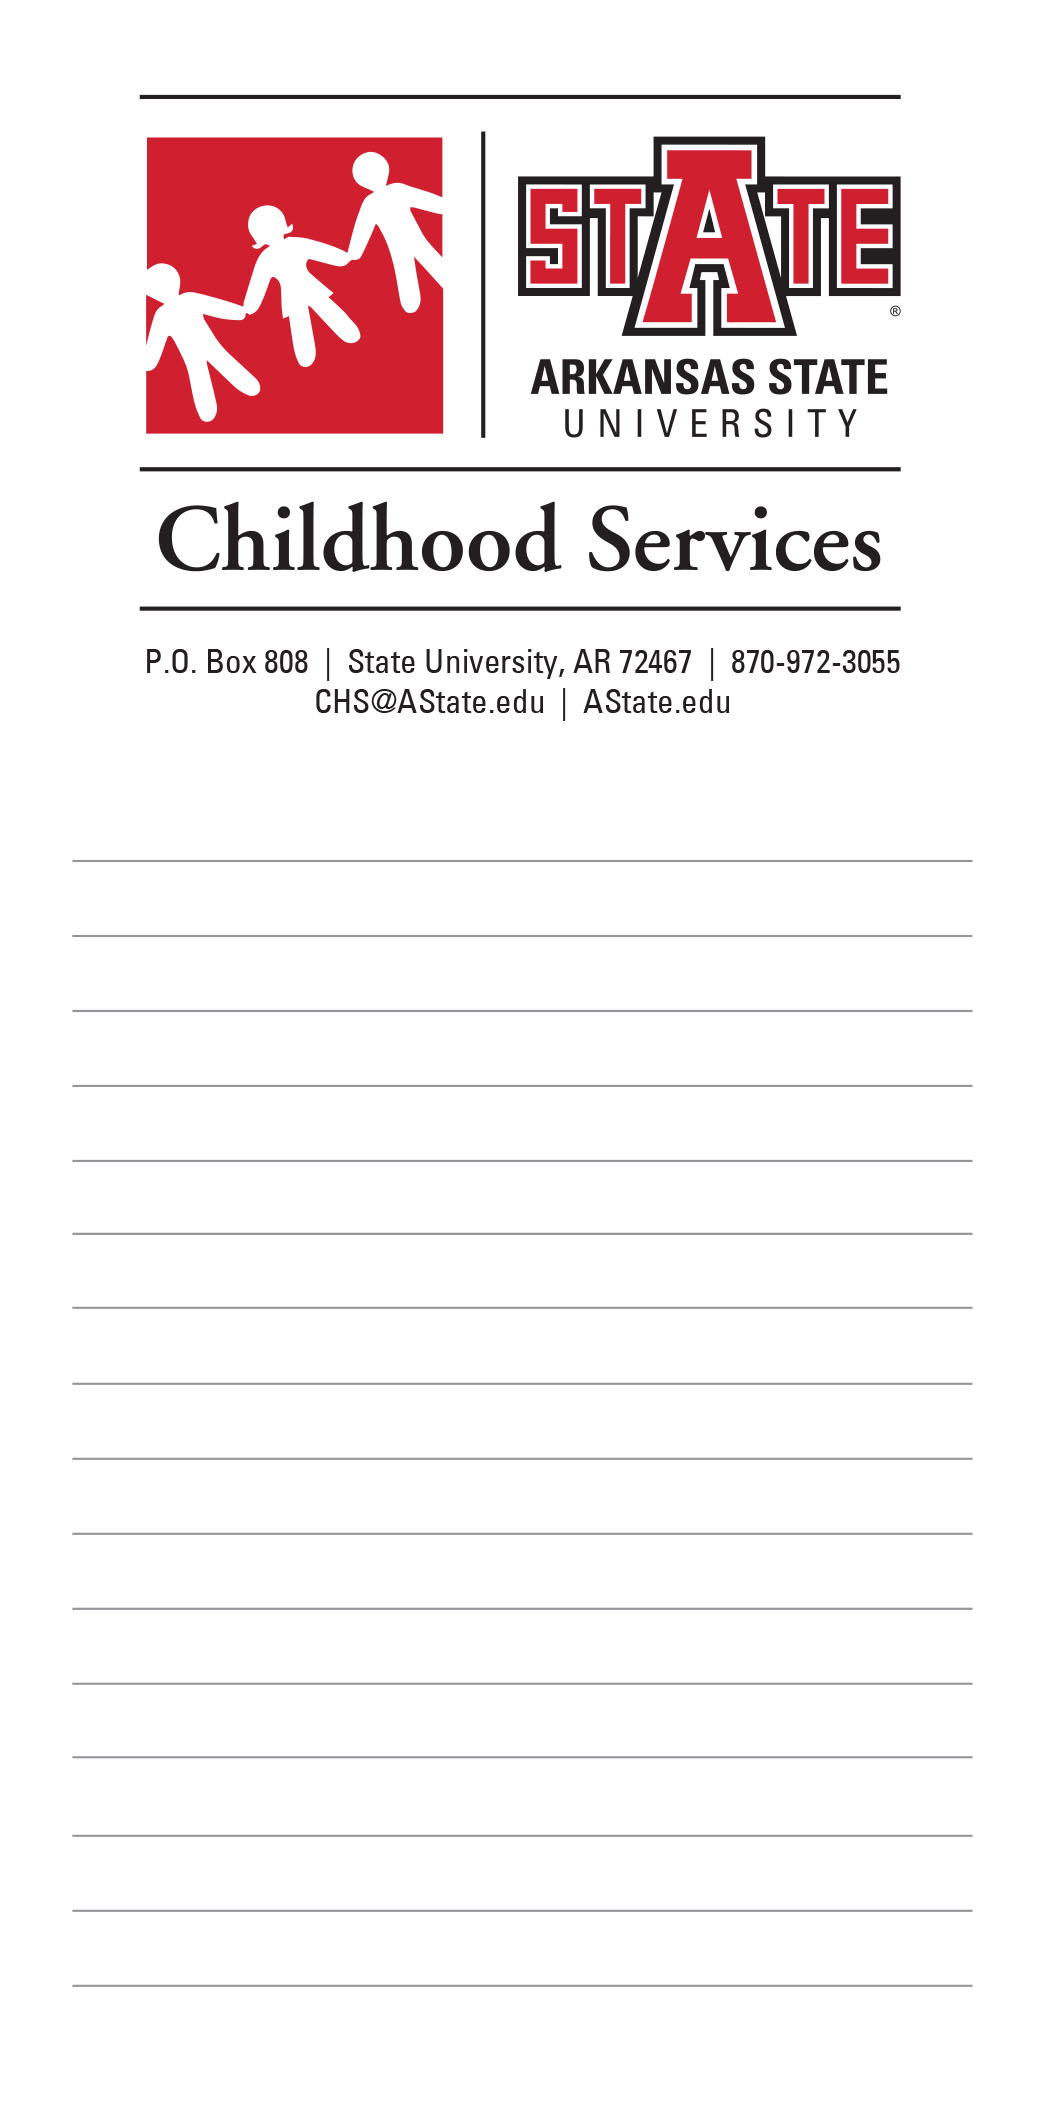 Childhood Services notepad